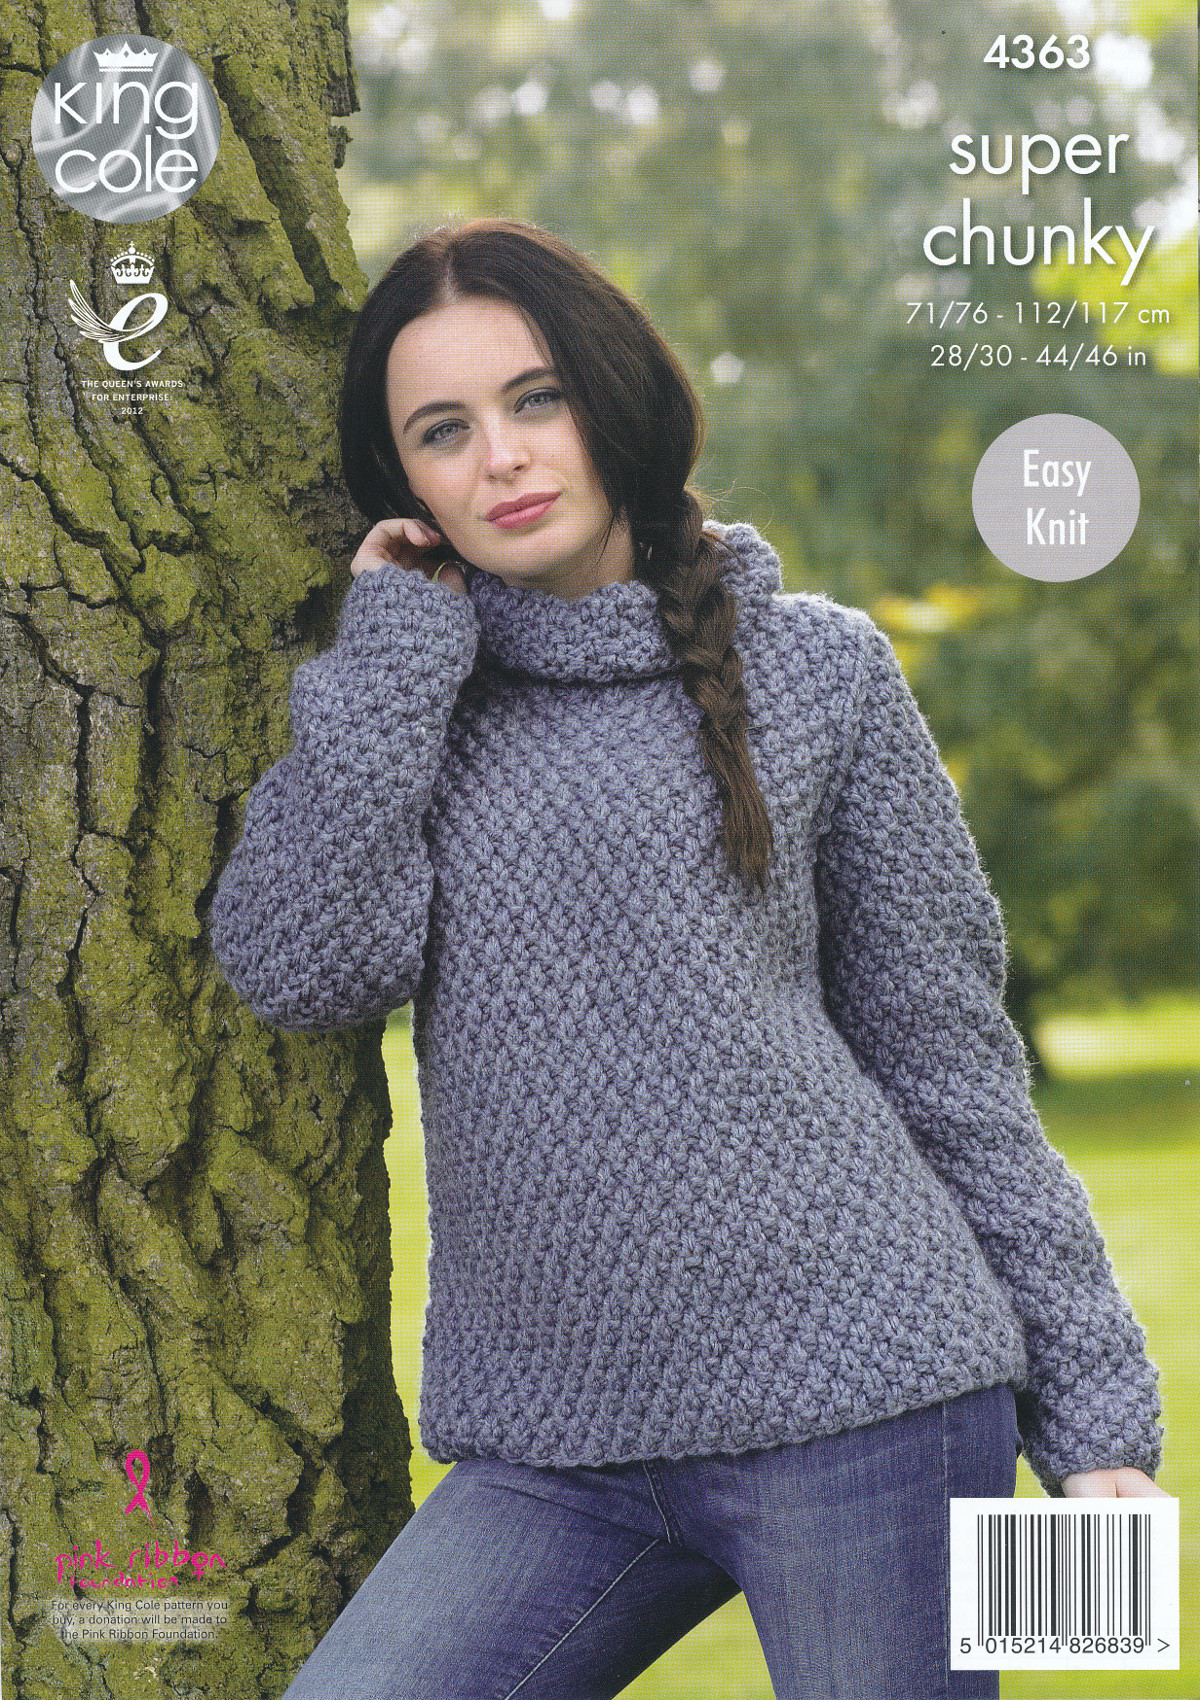 Knit Jumper Pattern Ladies Super Chunky Knitting Pattern King Cole Easy Knit Sweater